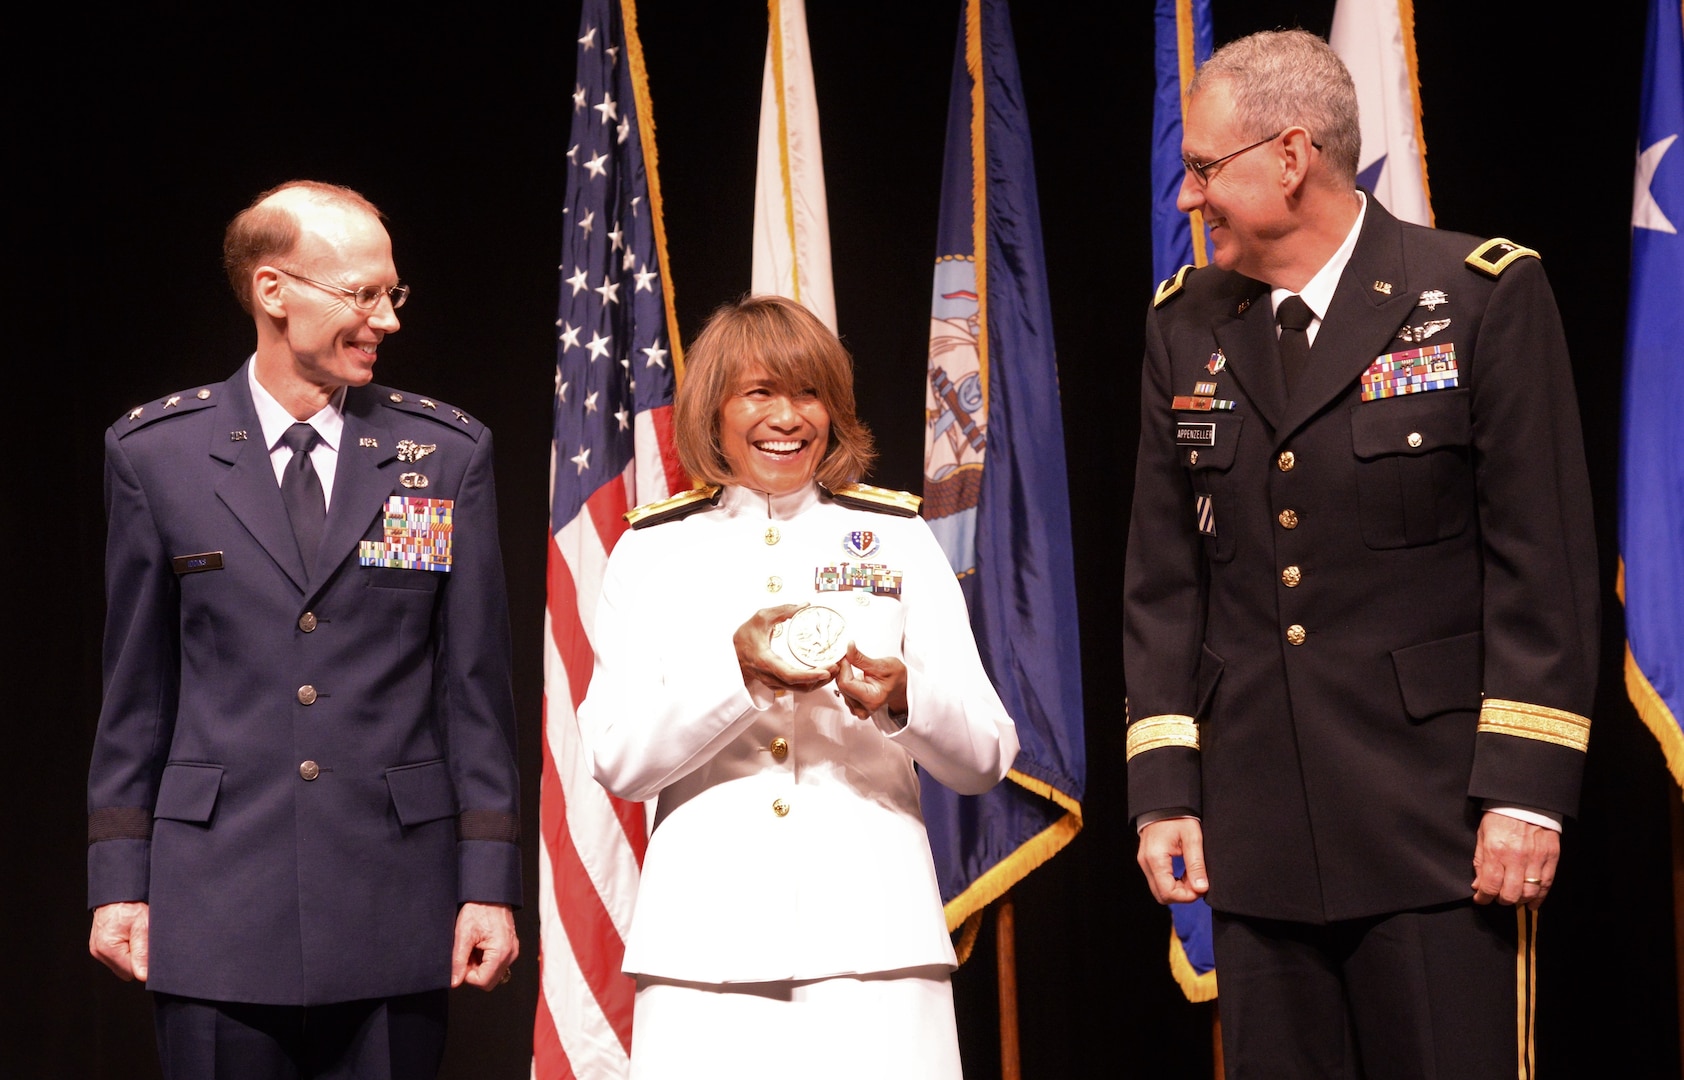 Air Force Maj. Gen. Bart O. Iddins (left), 59th Medical Wing commander, and Army Brig. Gen. George Appenzeller (right) , Brooke Army Medical Center commander, present keynote speaker Vice Adm. Raquel Bono, director of the Defense Health Agency, with a US Navy Bicentennial Bronze medal during the San Antonio Uniformed Services Health Education Consortium graduation ceremony held June 7 at the Lila Cockrell Theatre in downtown San Antonio.  The front side of the coin is a Surface ship, aircraft carrier, fighter jet and submarine, while the reverse has the Flagship Alfred of the First American Fleet serving from 1775-1778 and the American eagle grasping an anchor.